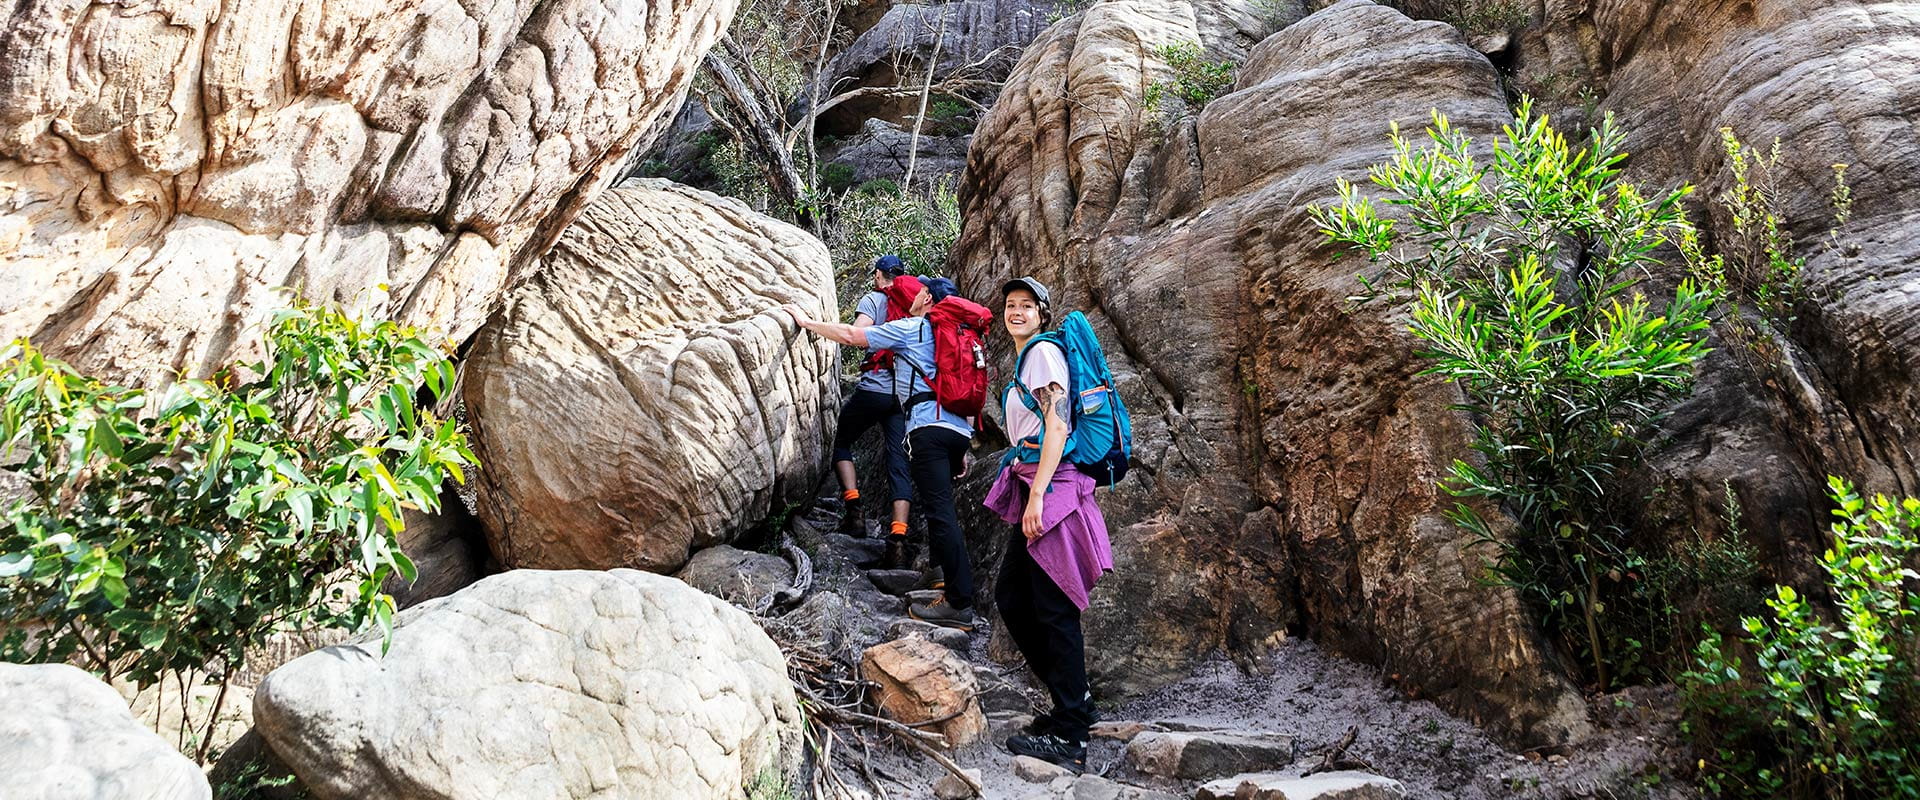 A group of hikers ascend the trail past large boulders on their way to the summit